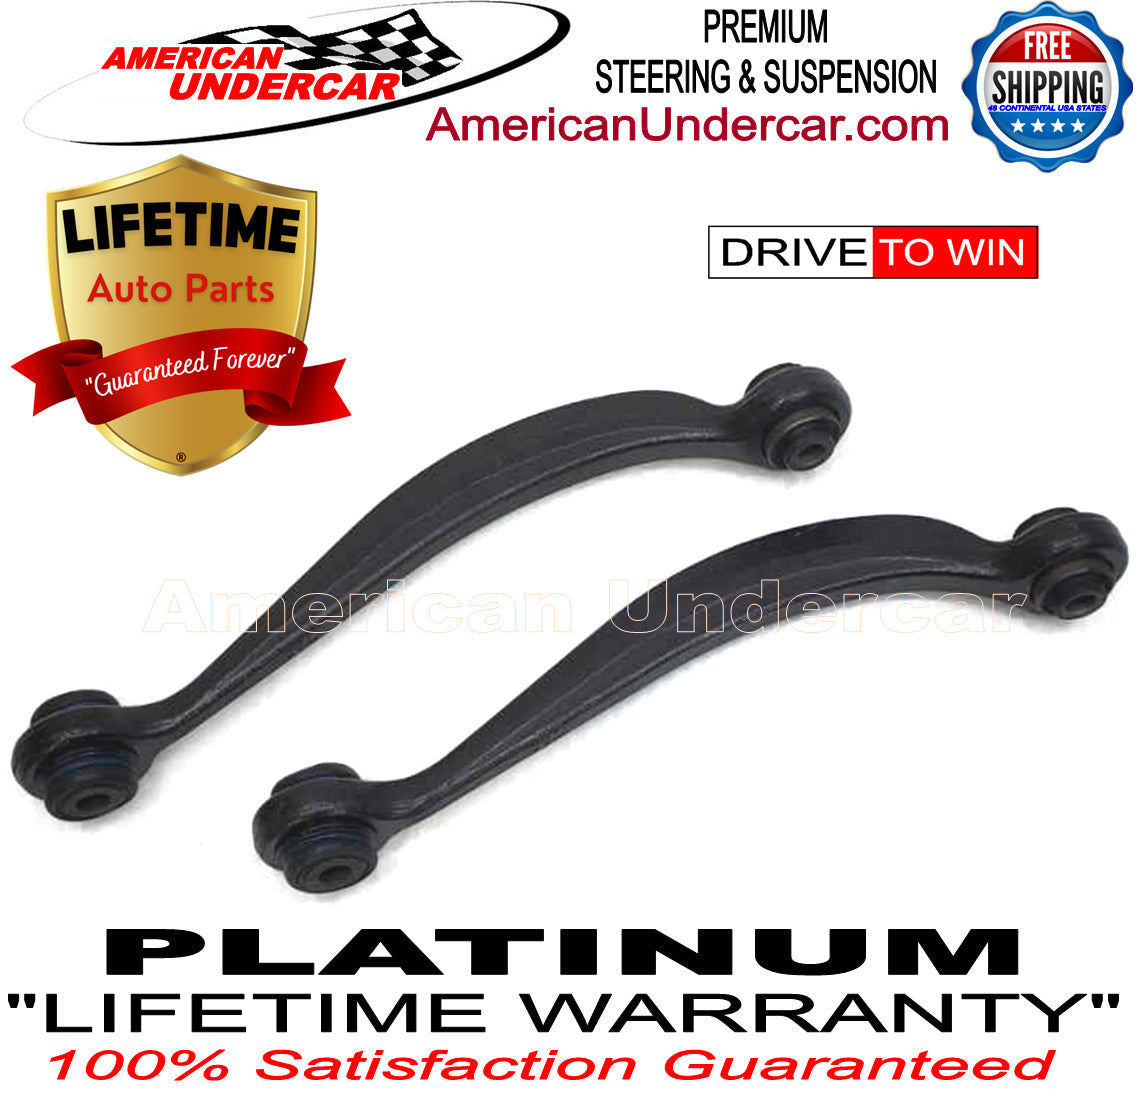 Lifetime Control Arm Rear Suspension Kit for 2009-2017 Chevrolet Traverse 2WD, AWD